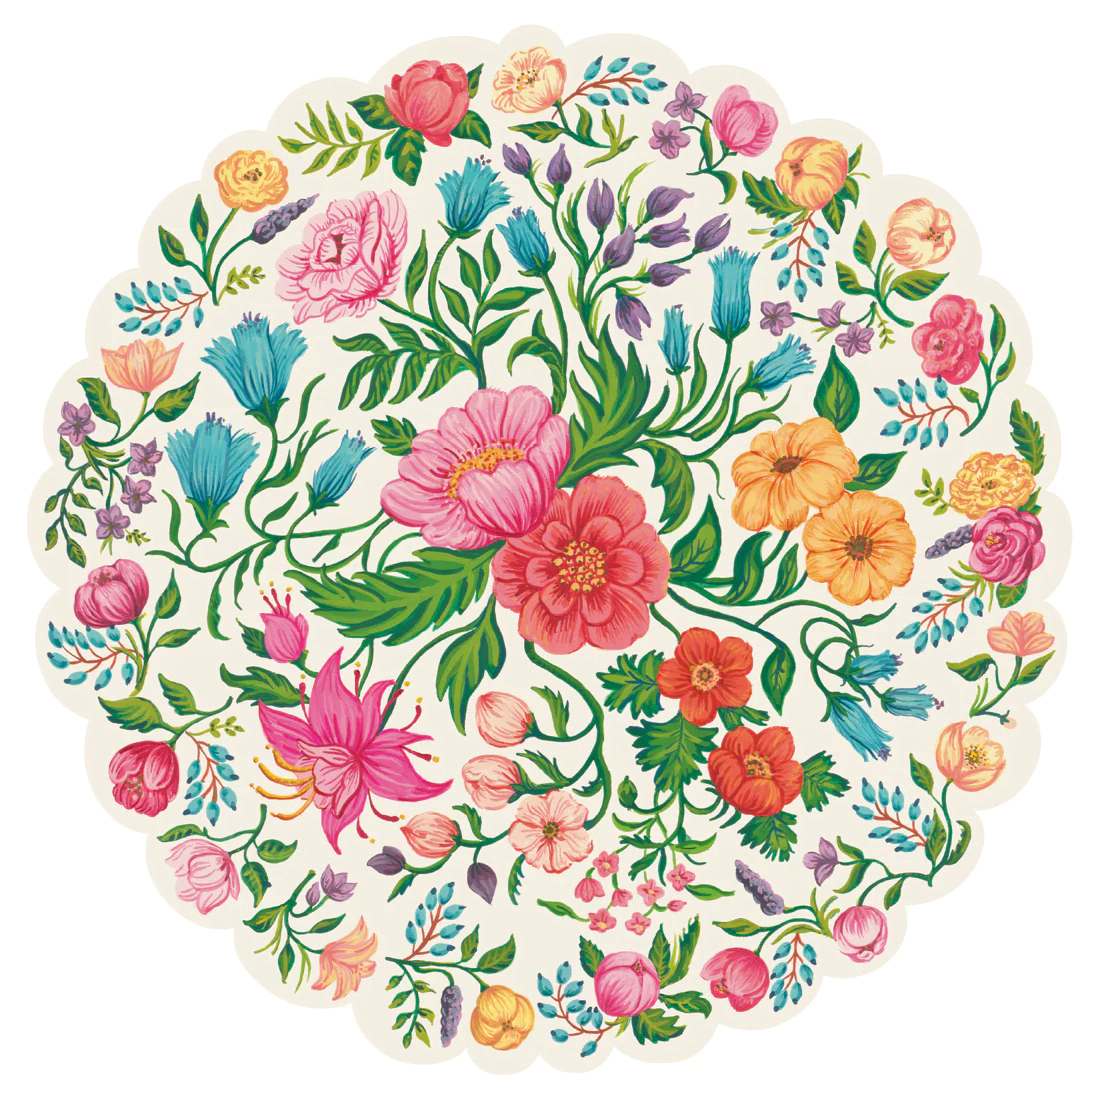 Die Cut Sweet Garden Posey Placemat – 12 Sheets | Hester & Cook | Iris Gifts & Décor